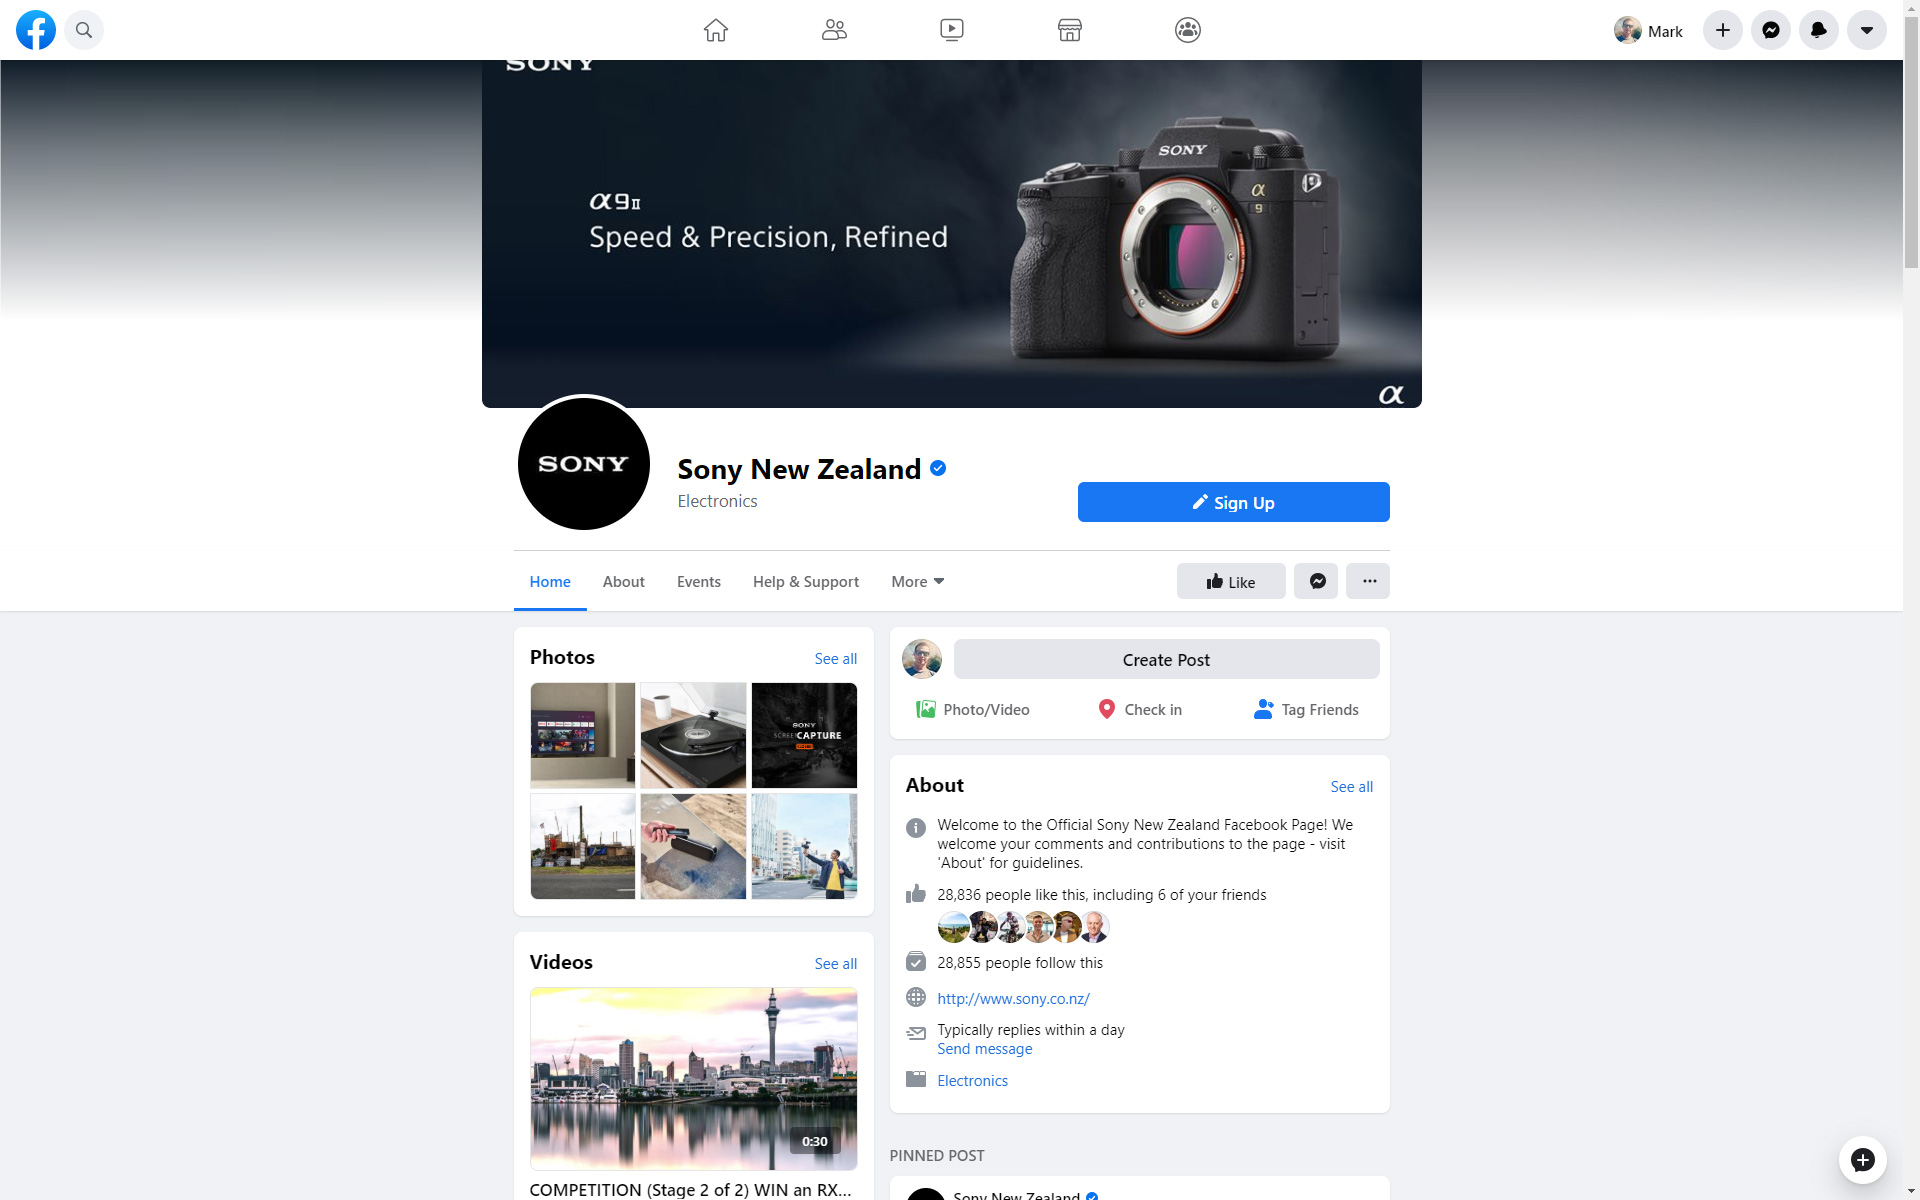 New Facebook Page Design